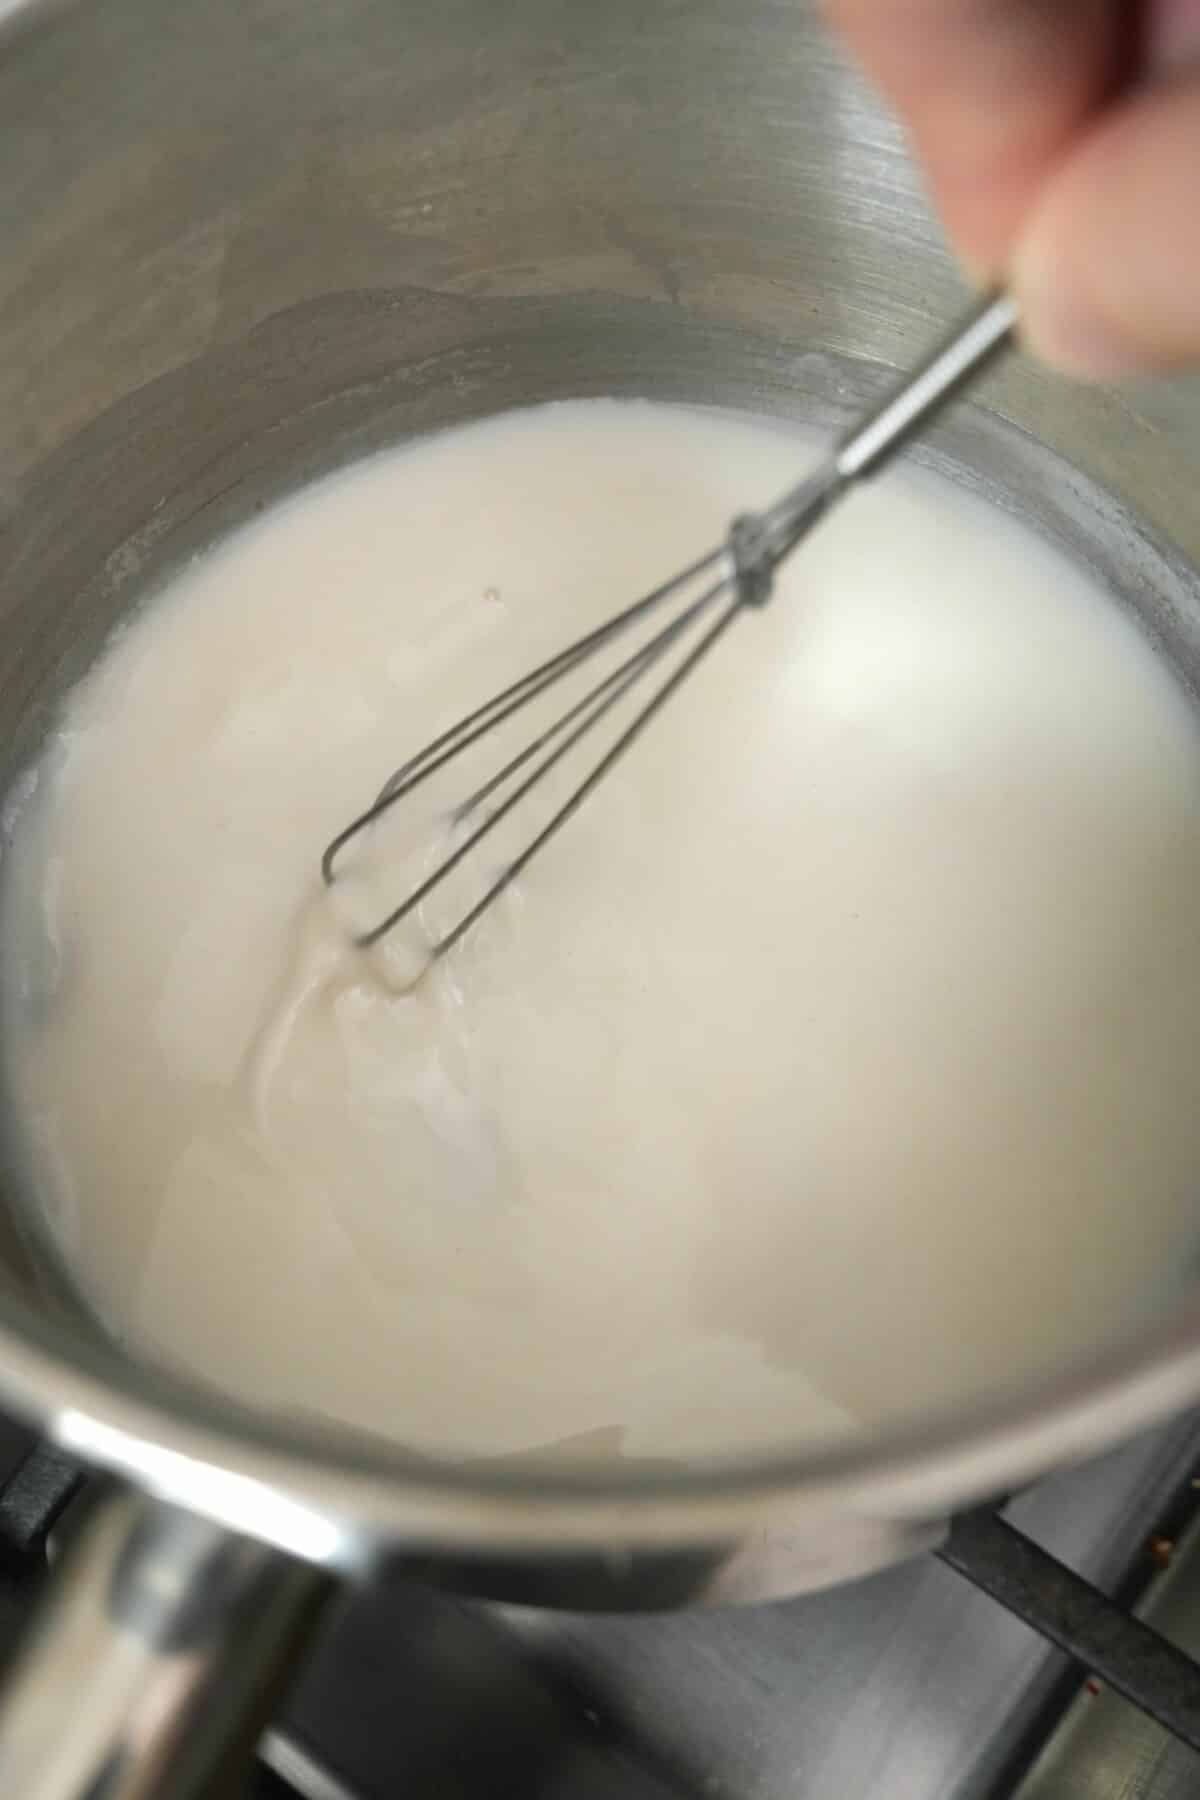 Milk, flour, and water mixing in a pot to make a tangzhong.